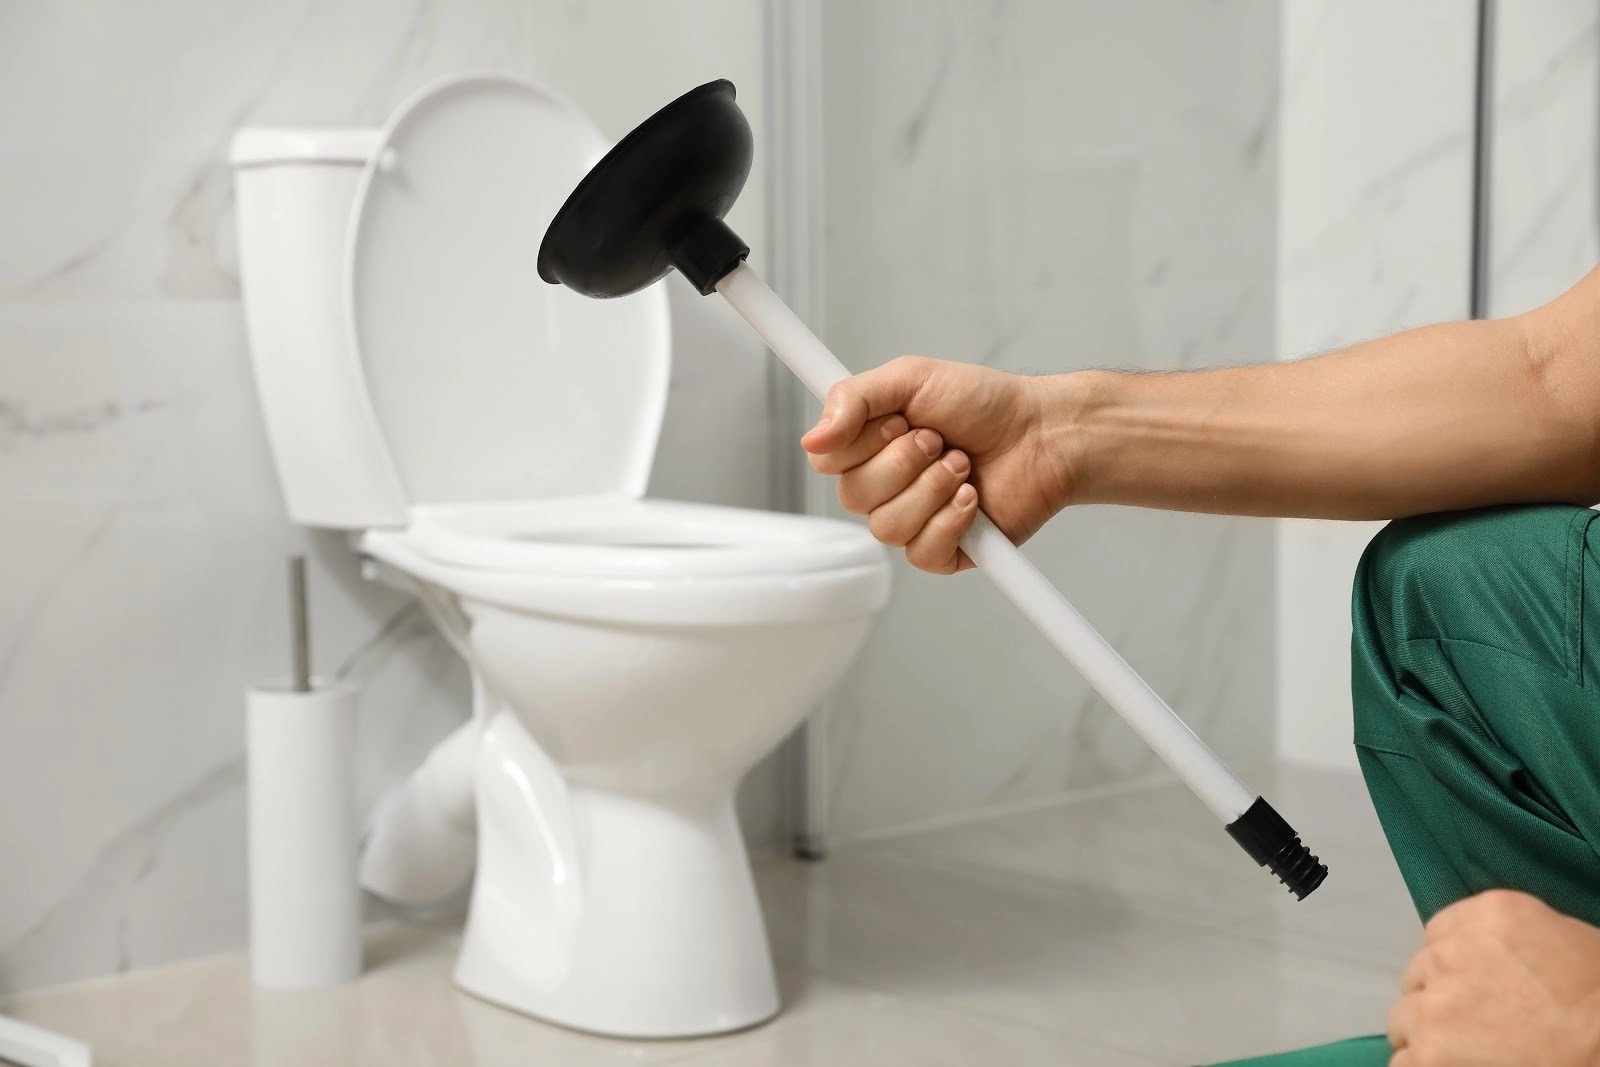 How To Unclog A Toilet With Plunger